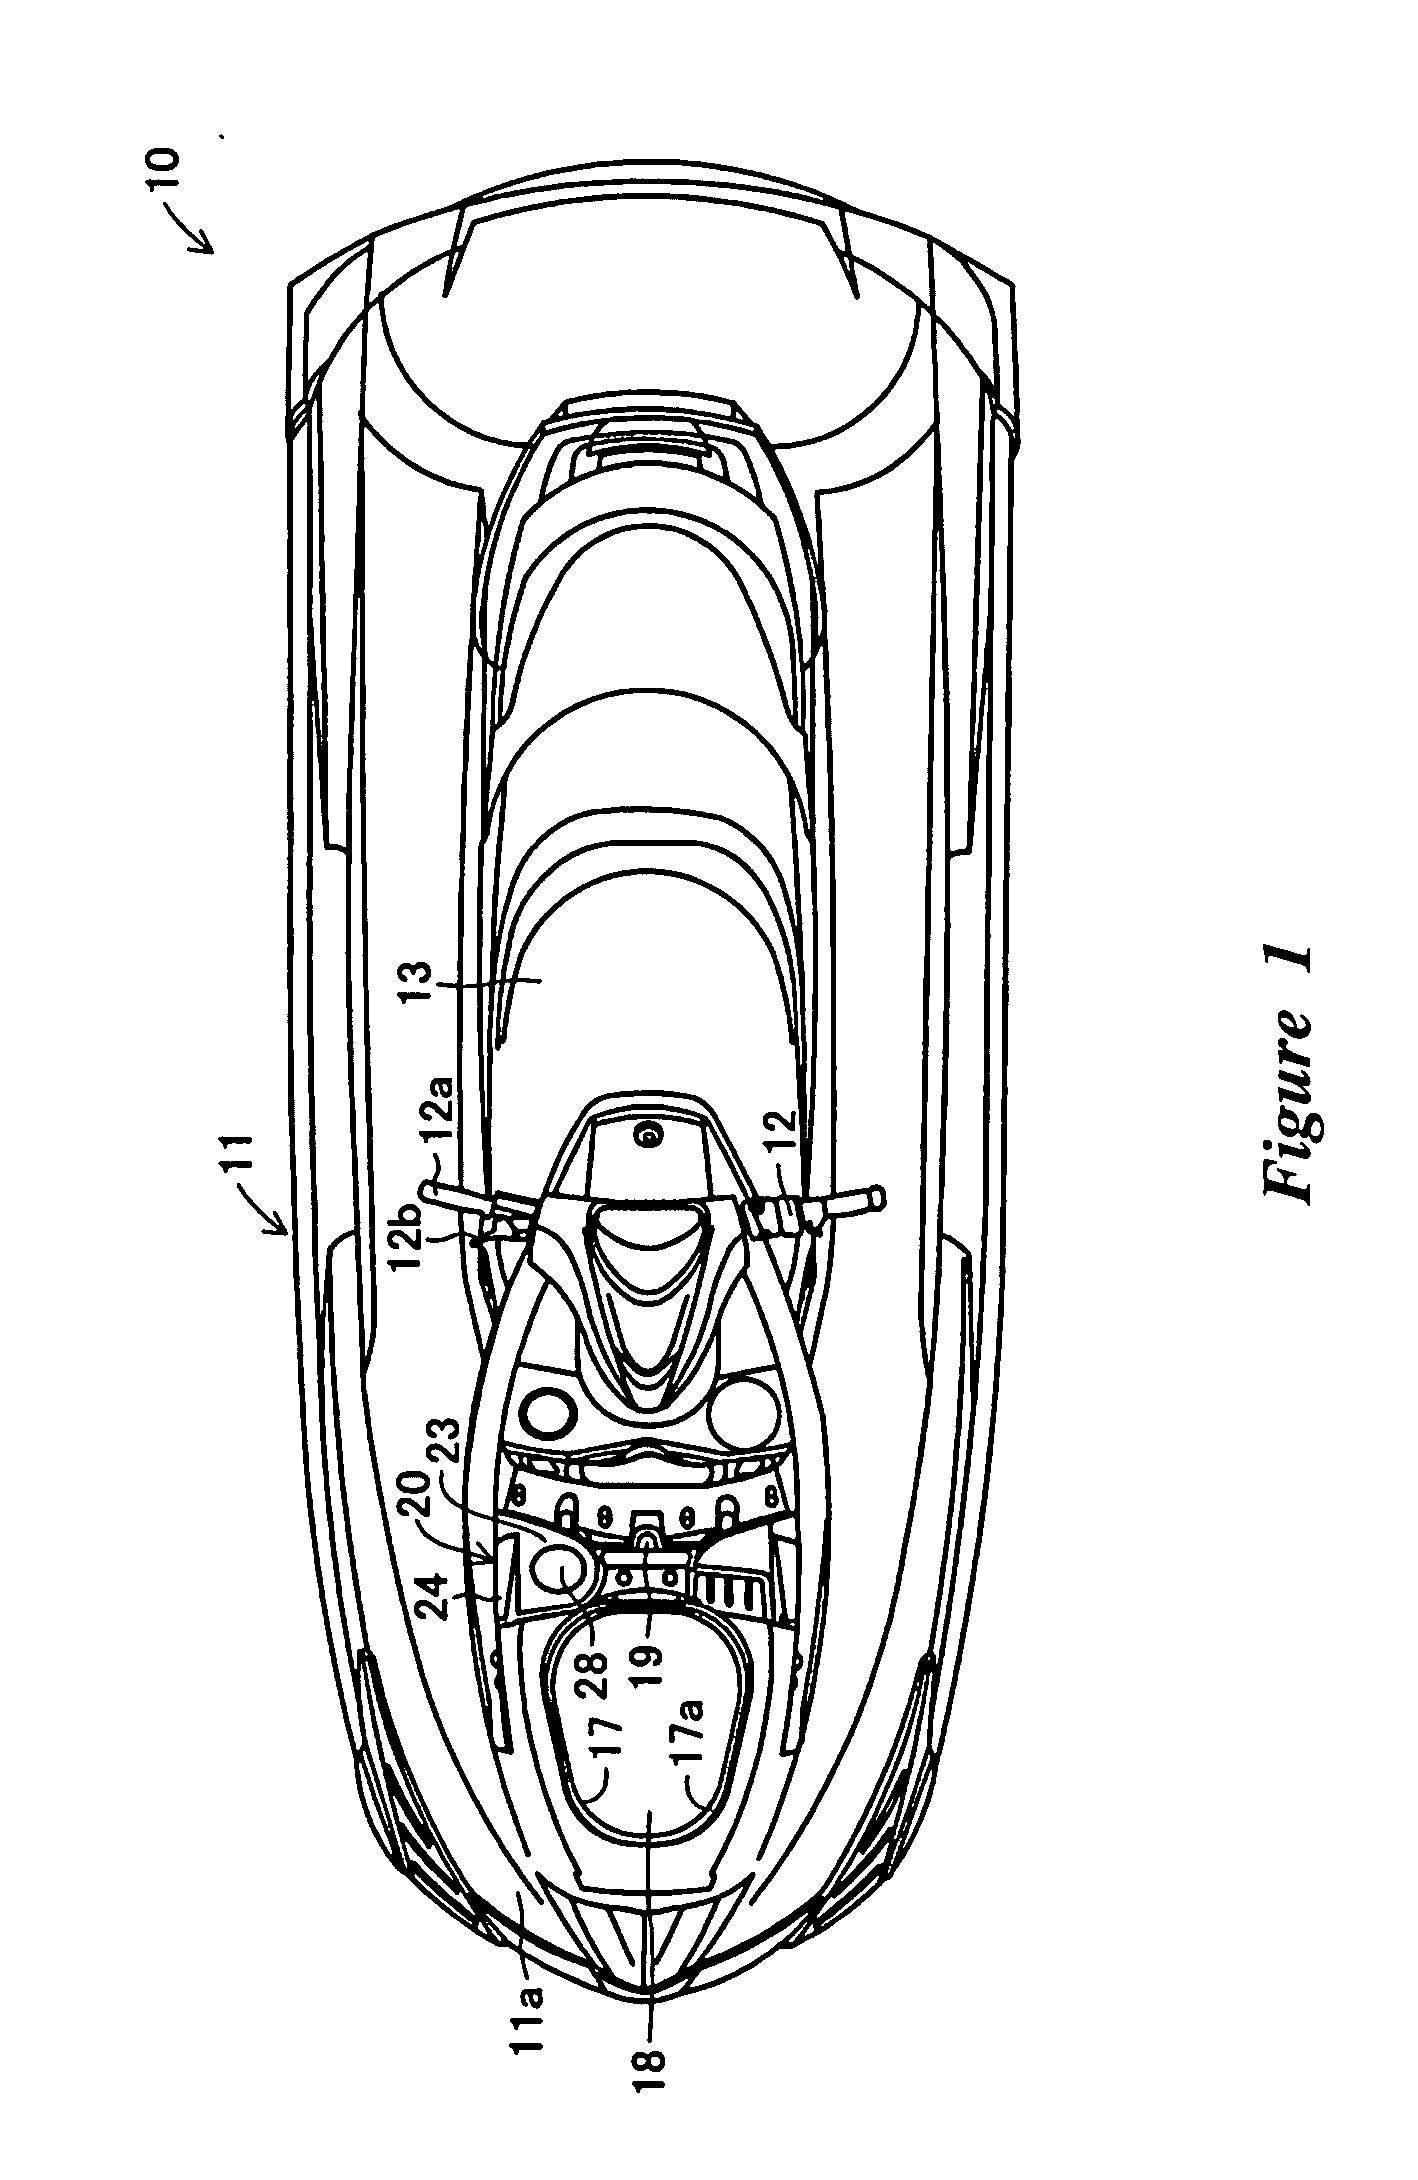 Fluid filler opening system for a small planing boat